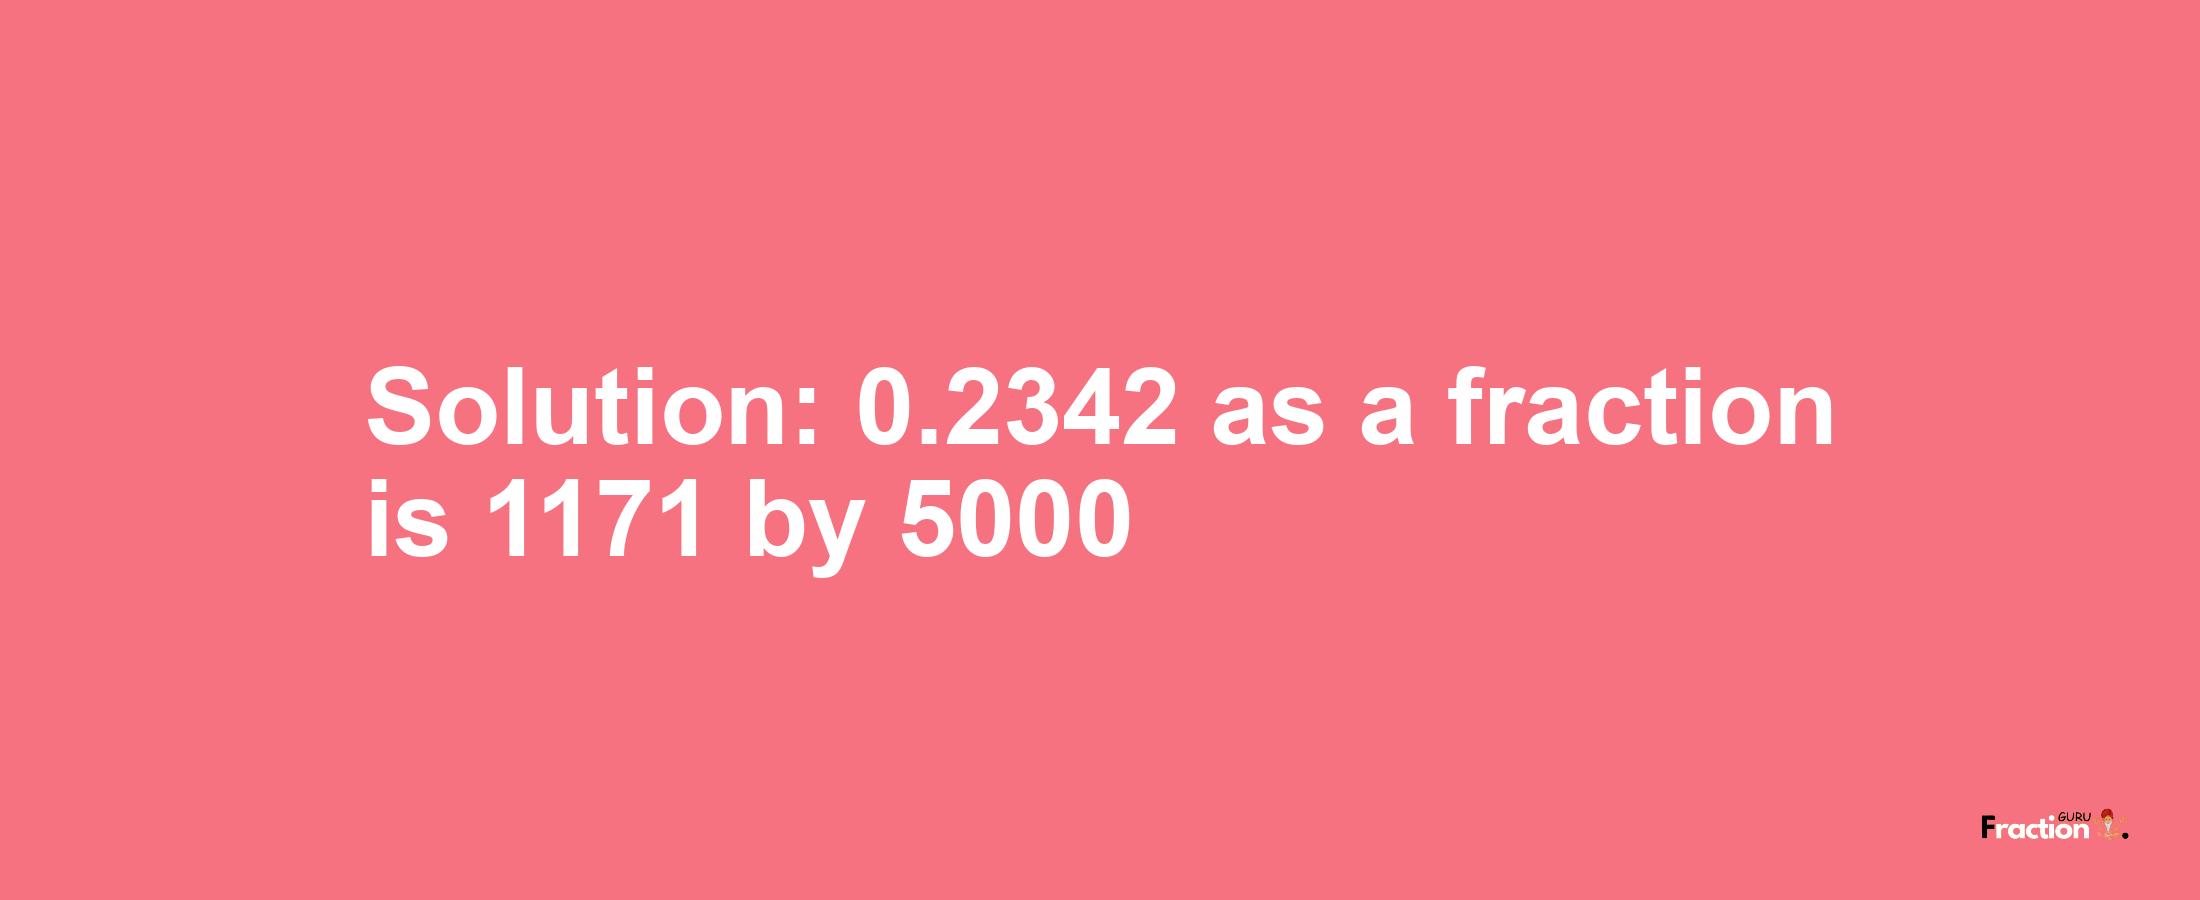 Solution:0.2342 as a fraction is 1171/5000